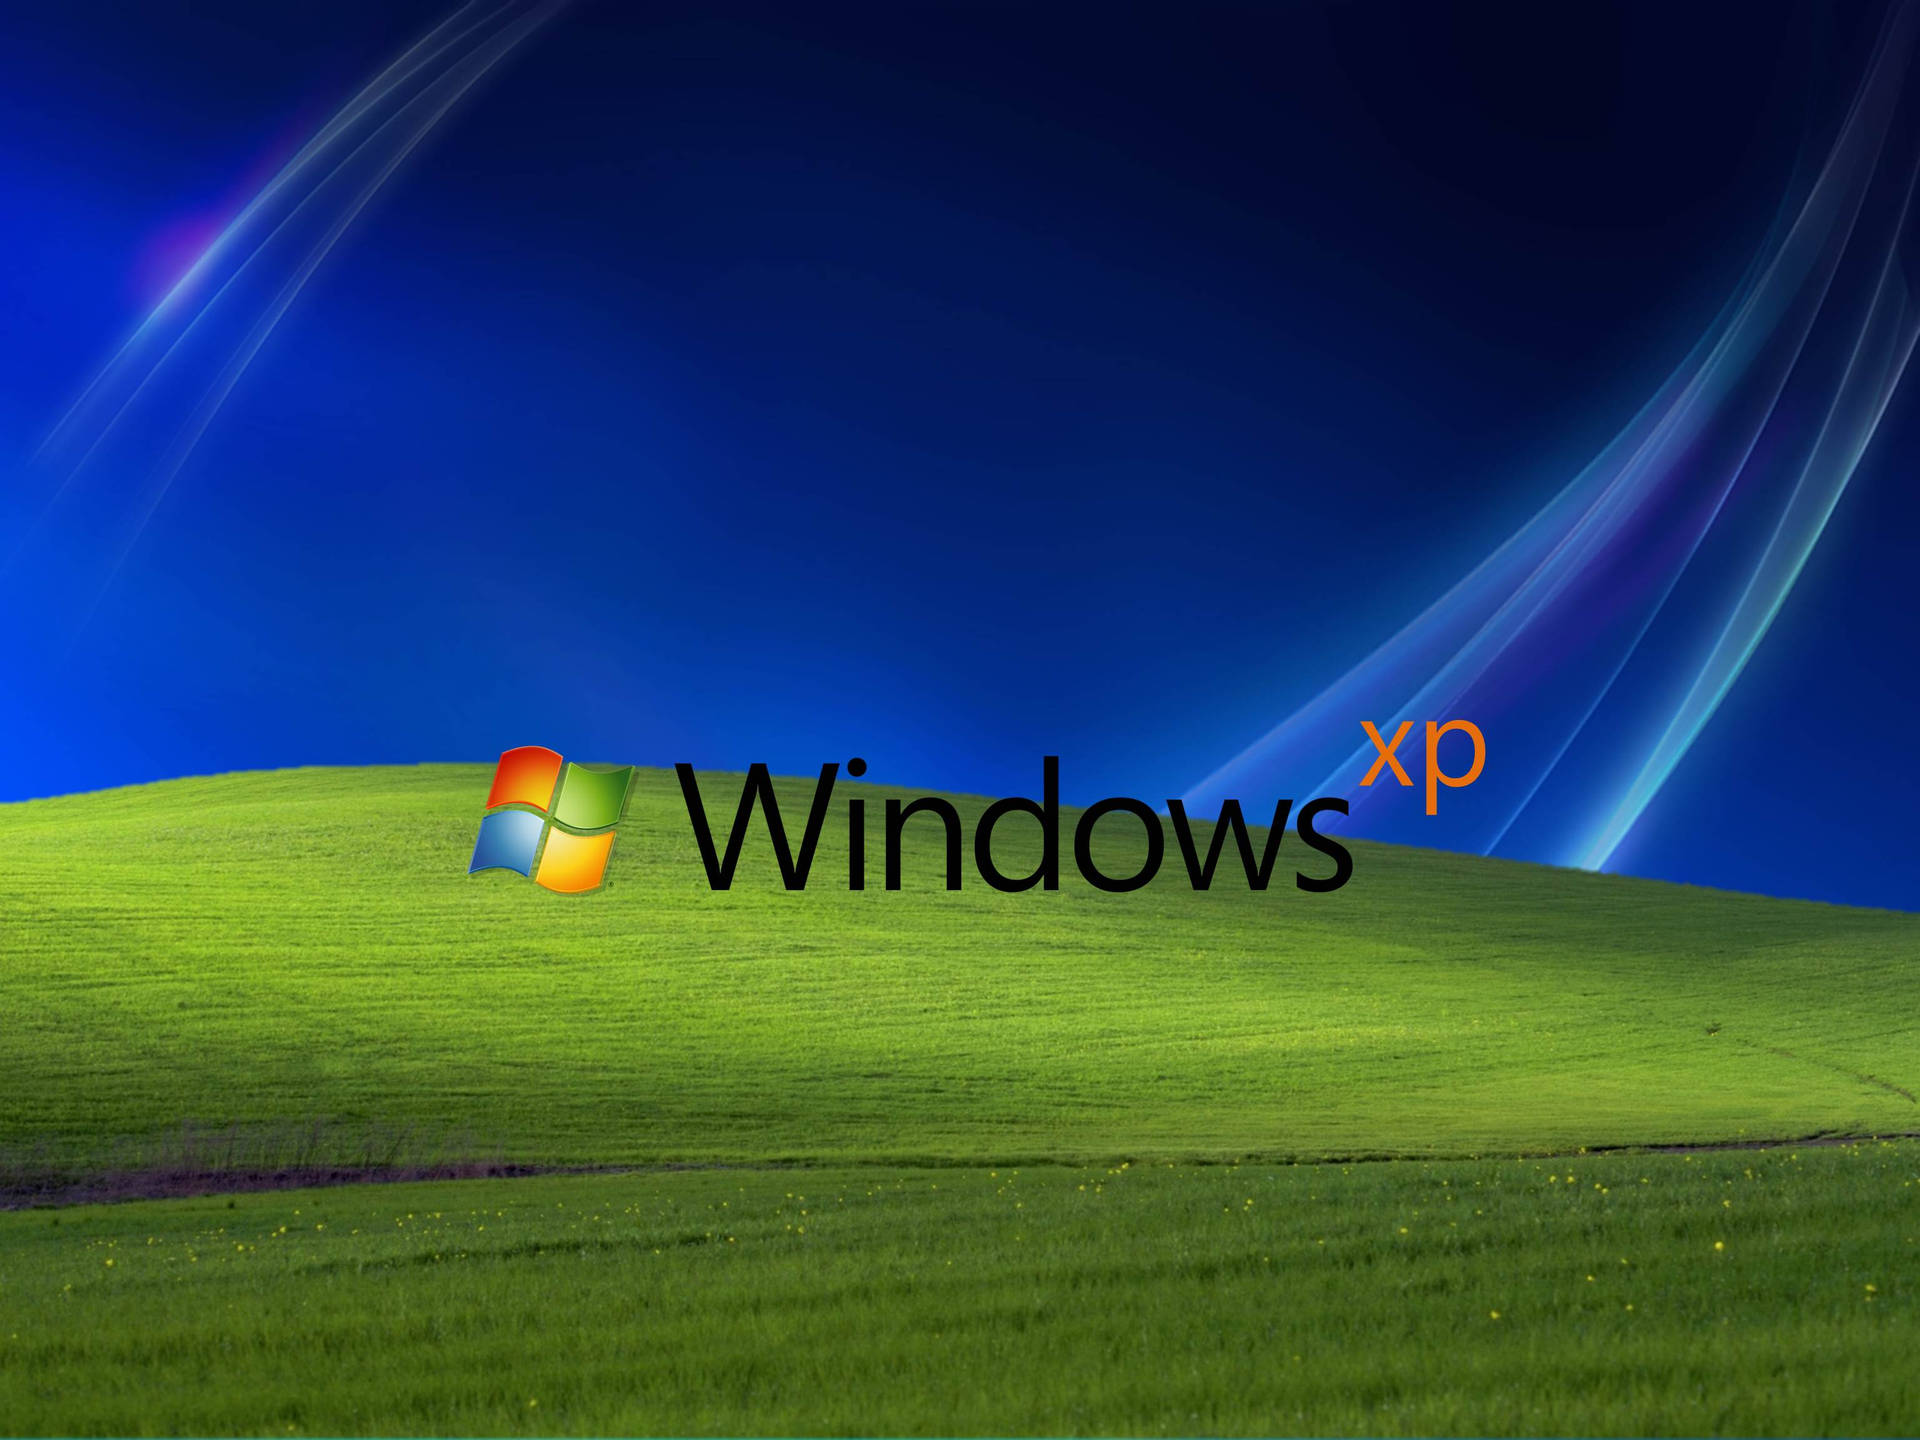 3070X2302 Windows Xp Wallpaper and Background